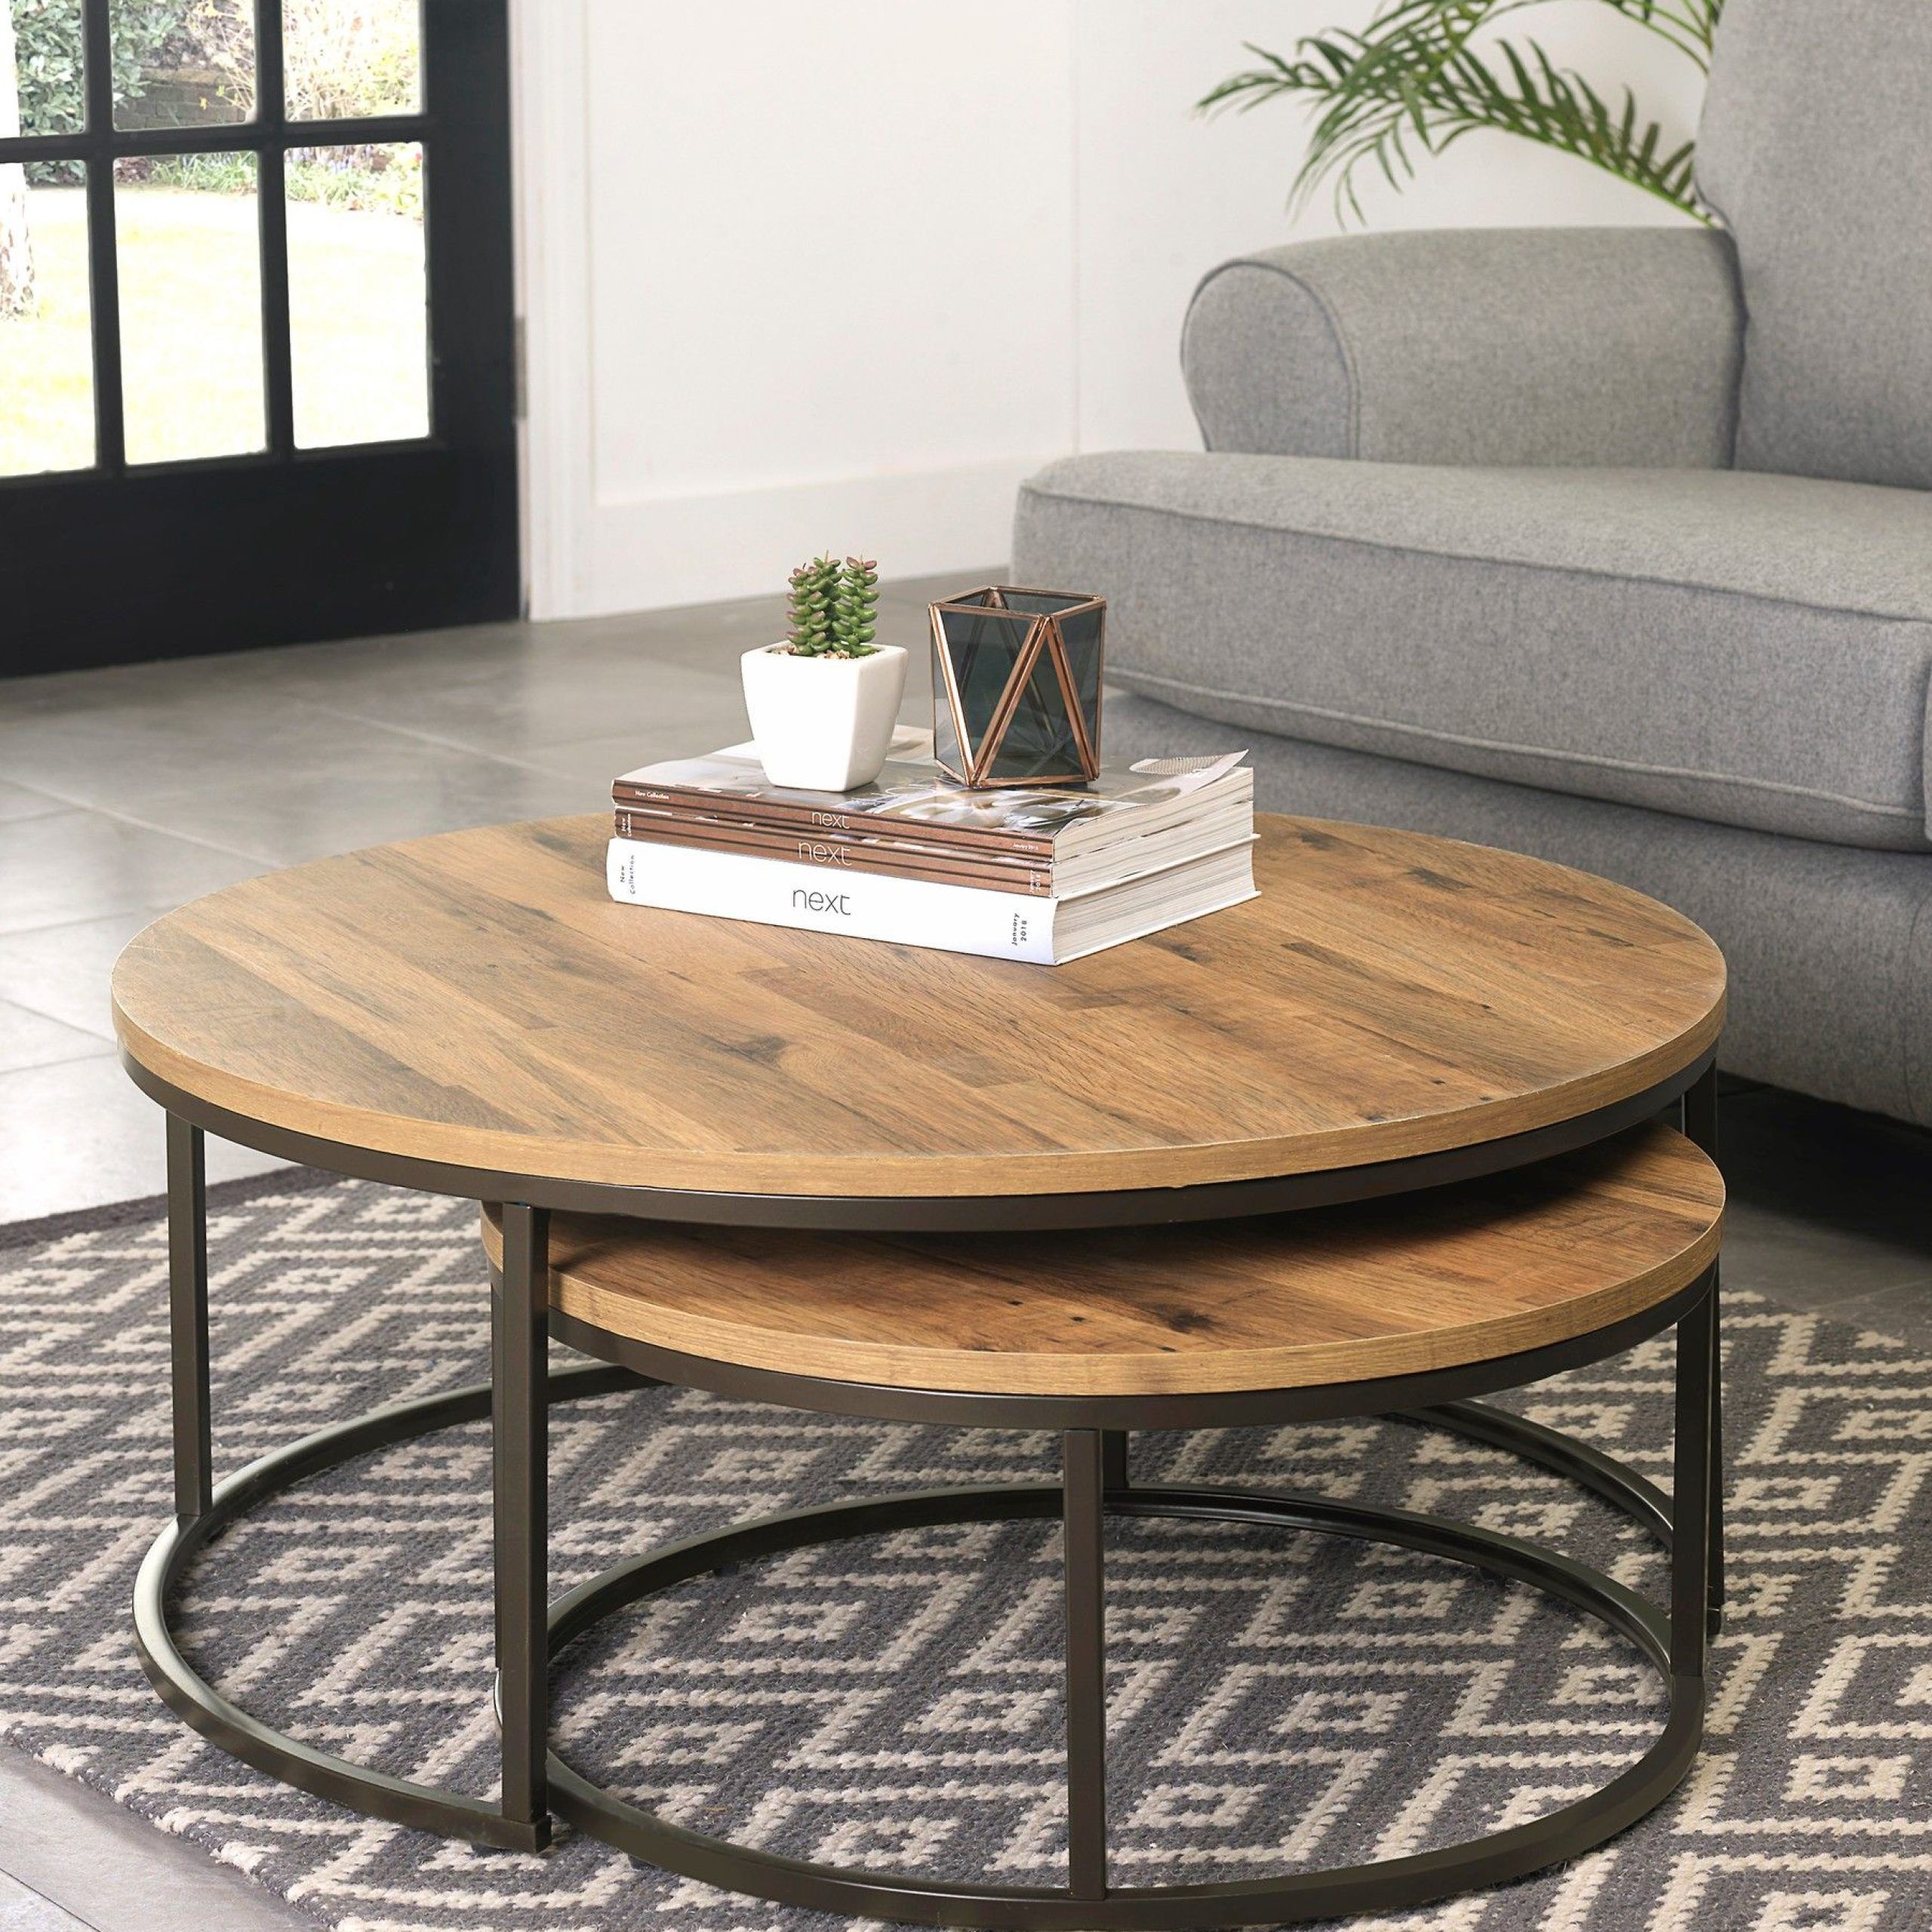 Bronx Round Coffee Nest Of Tables | Modern Coffee Table Decor For Nesting Coffee Tables (Gallery 15 of 20)